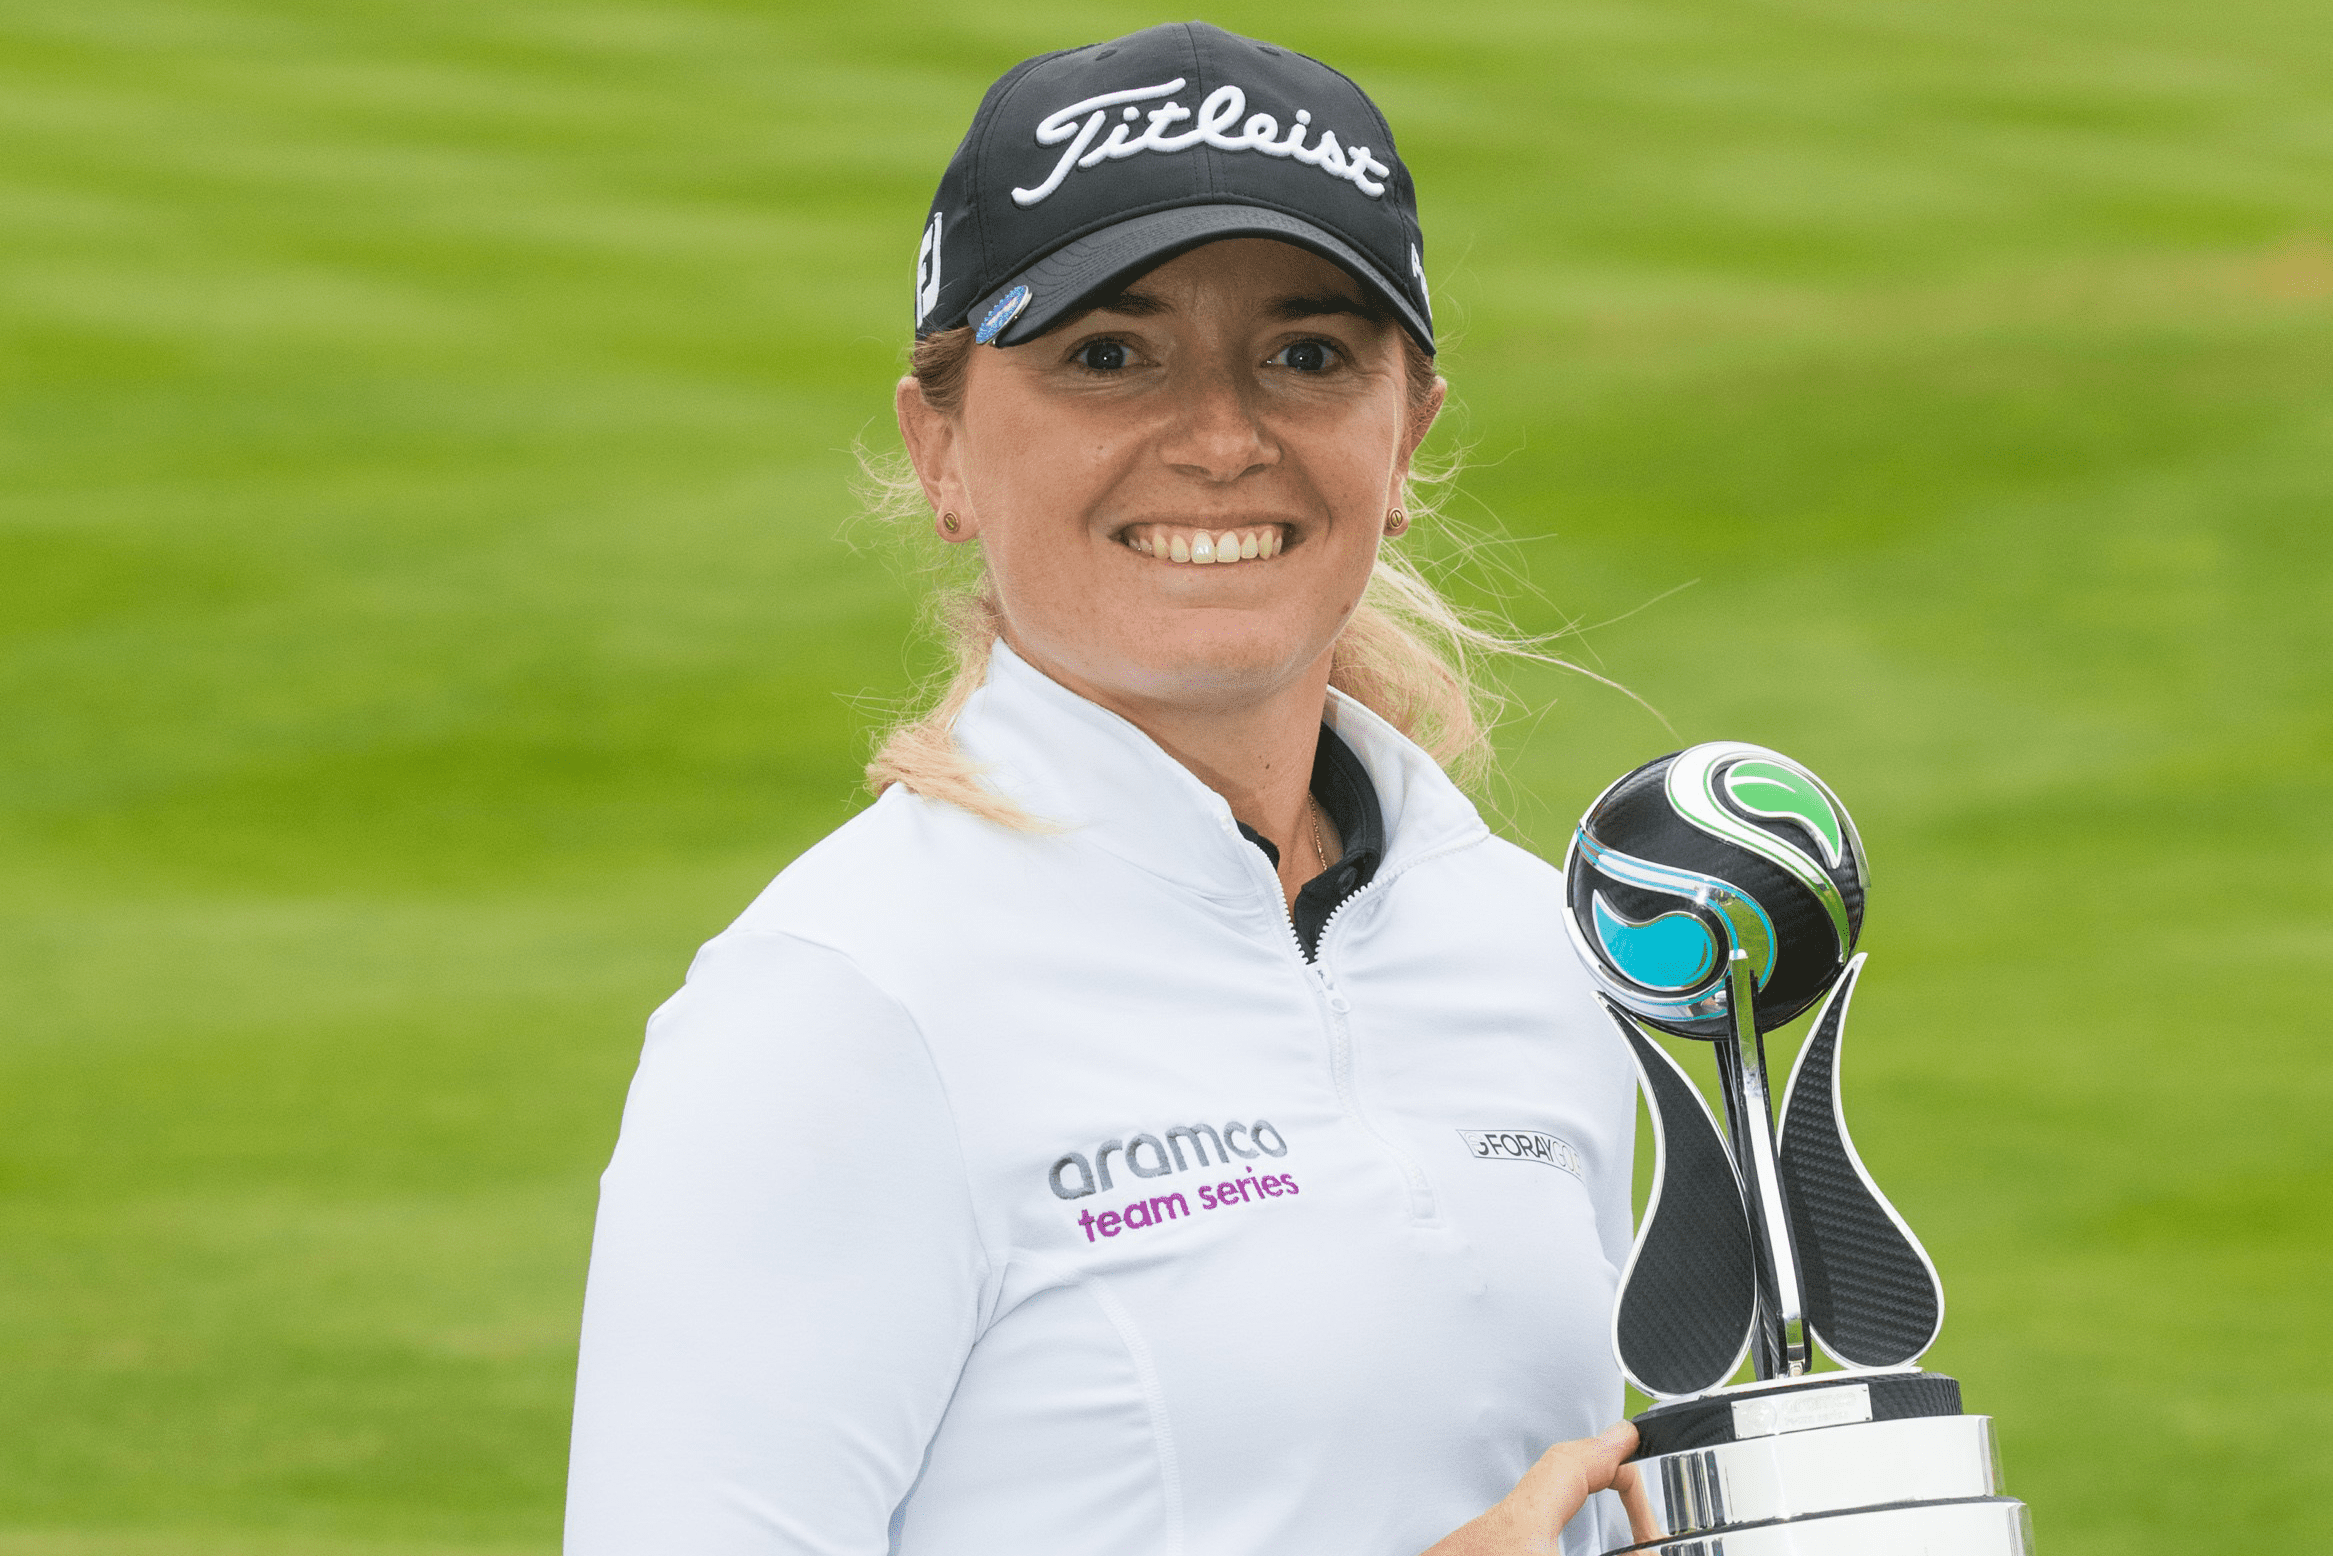 LAW WINS INDIVIDUAL TITLE WITH MONSTER EAGLE PUTT AS TEAM GARCIA TRIUMPHS AT ARAMCO TEAM SERIES – LONDON